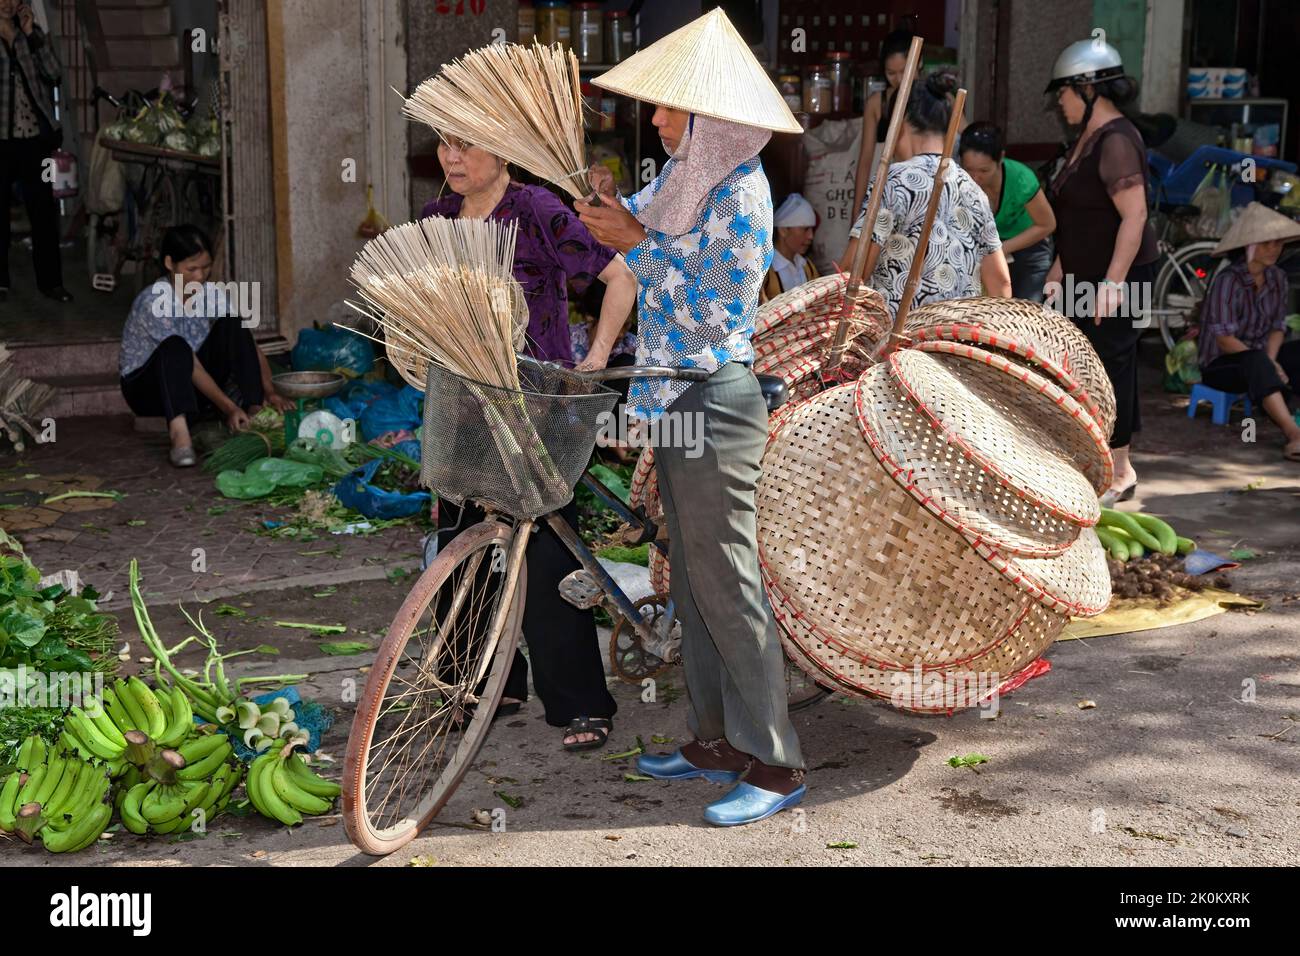 Vietnamese vendor wearing bamboo hat selling wicker items from bicycle, working in open air street market, Hai Phong, Vietnam Stock Photo